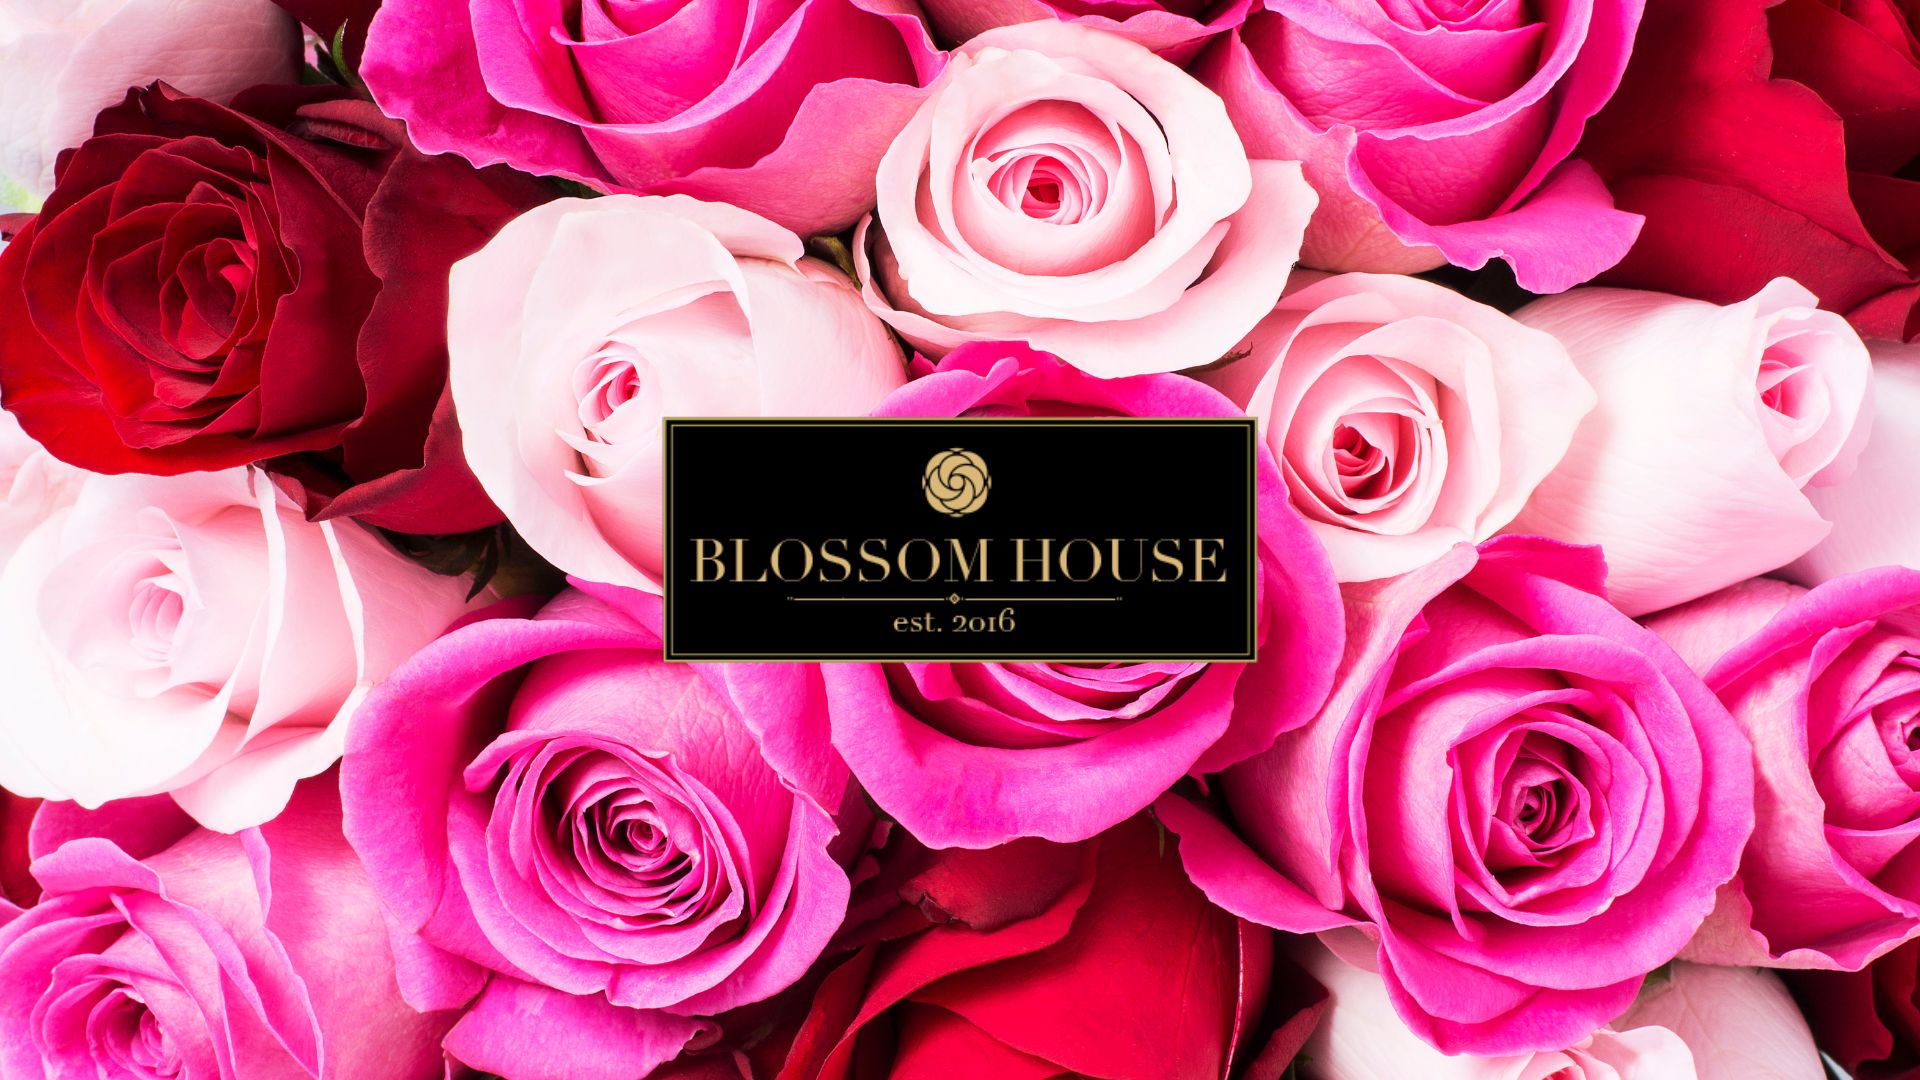 Blossom House flower image with logo